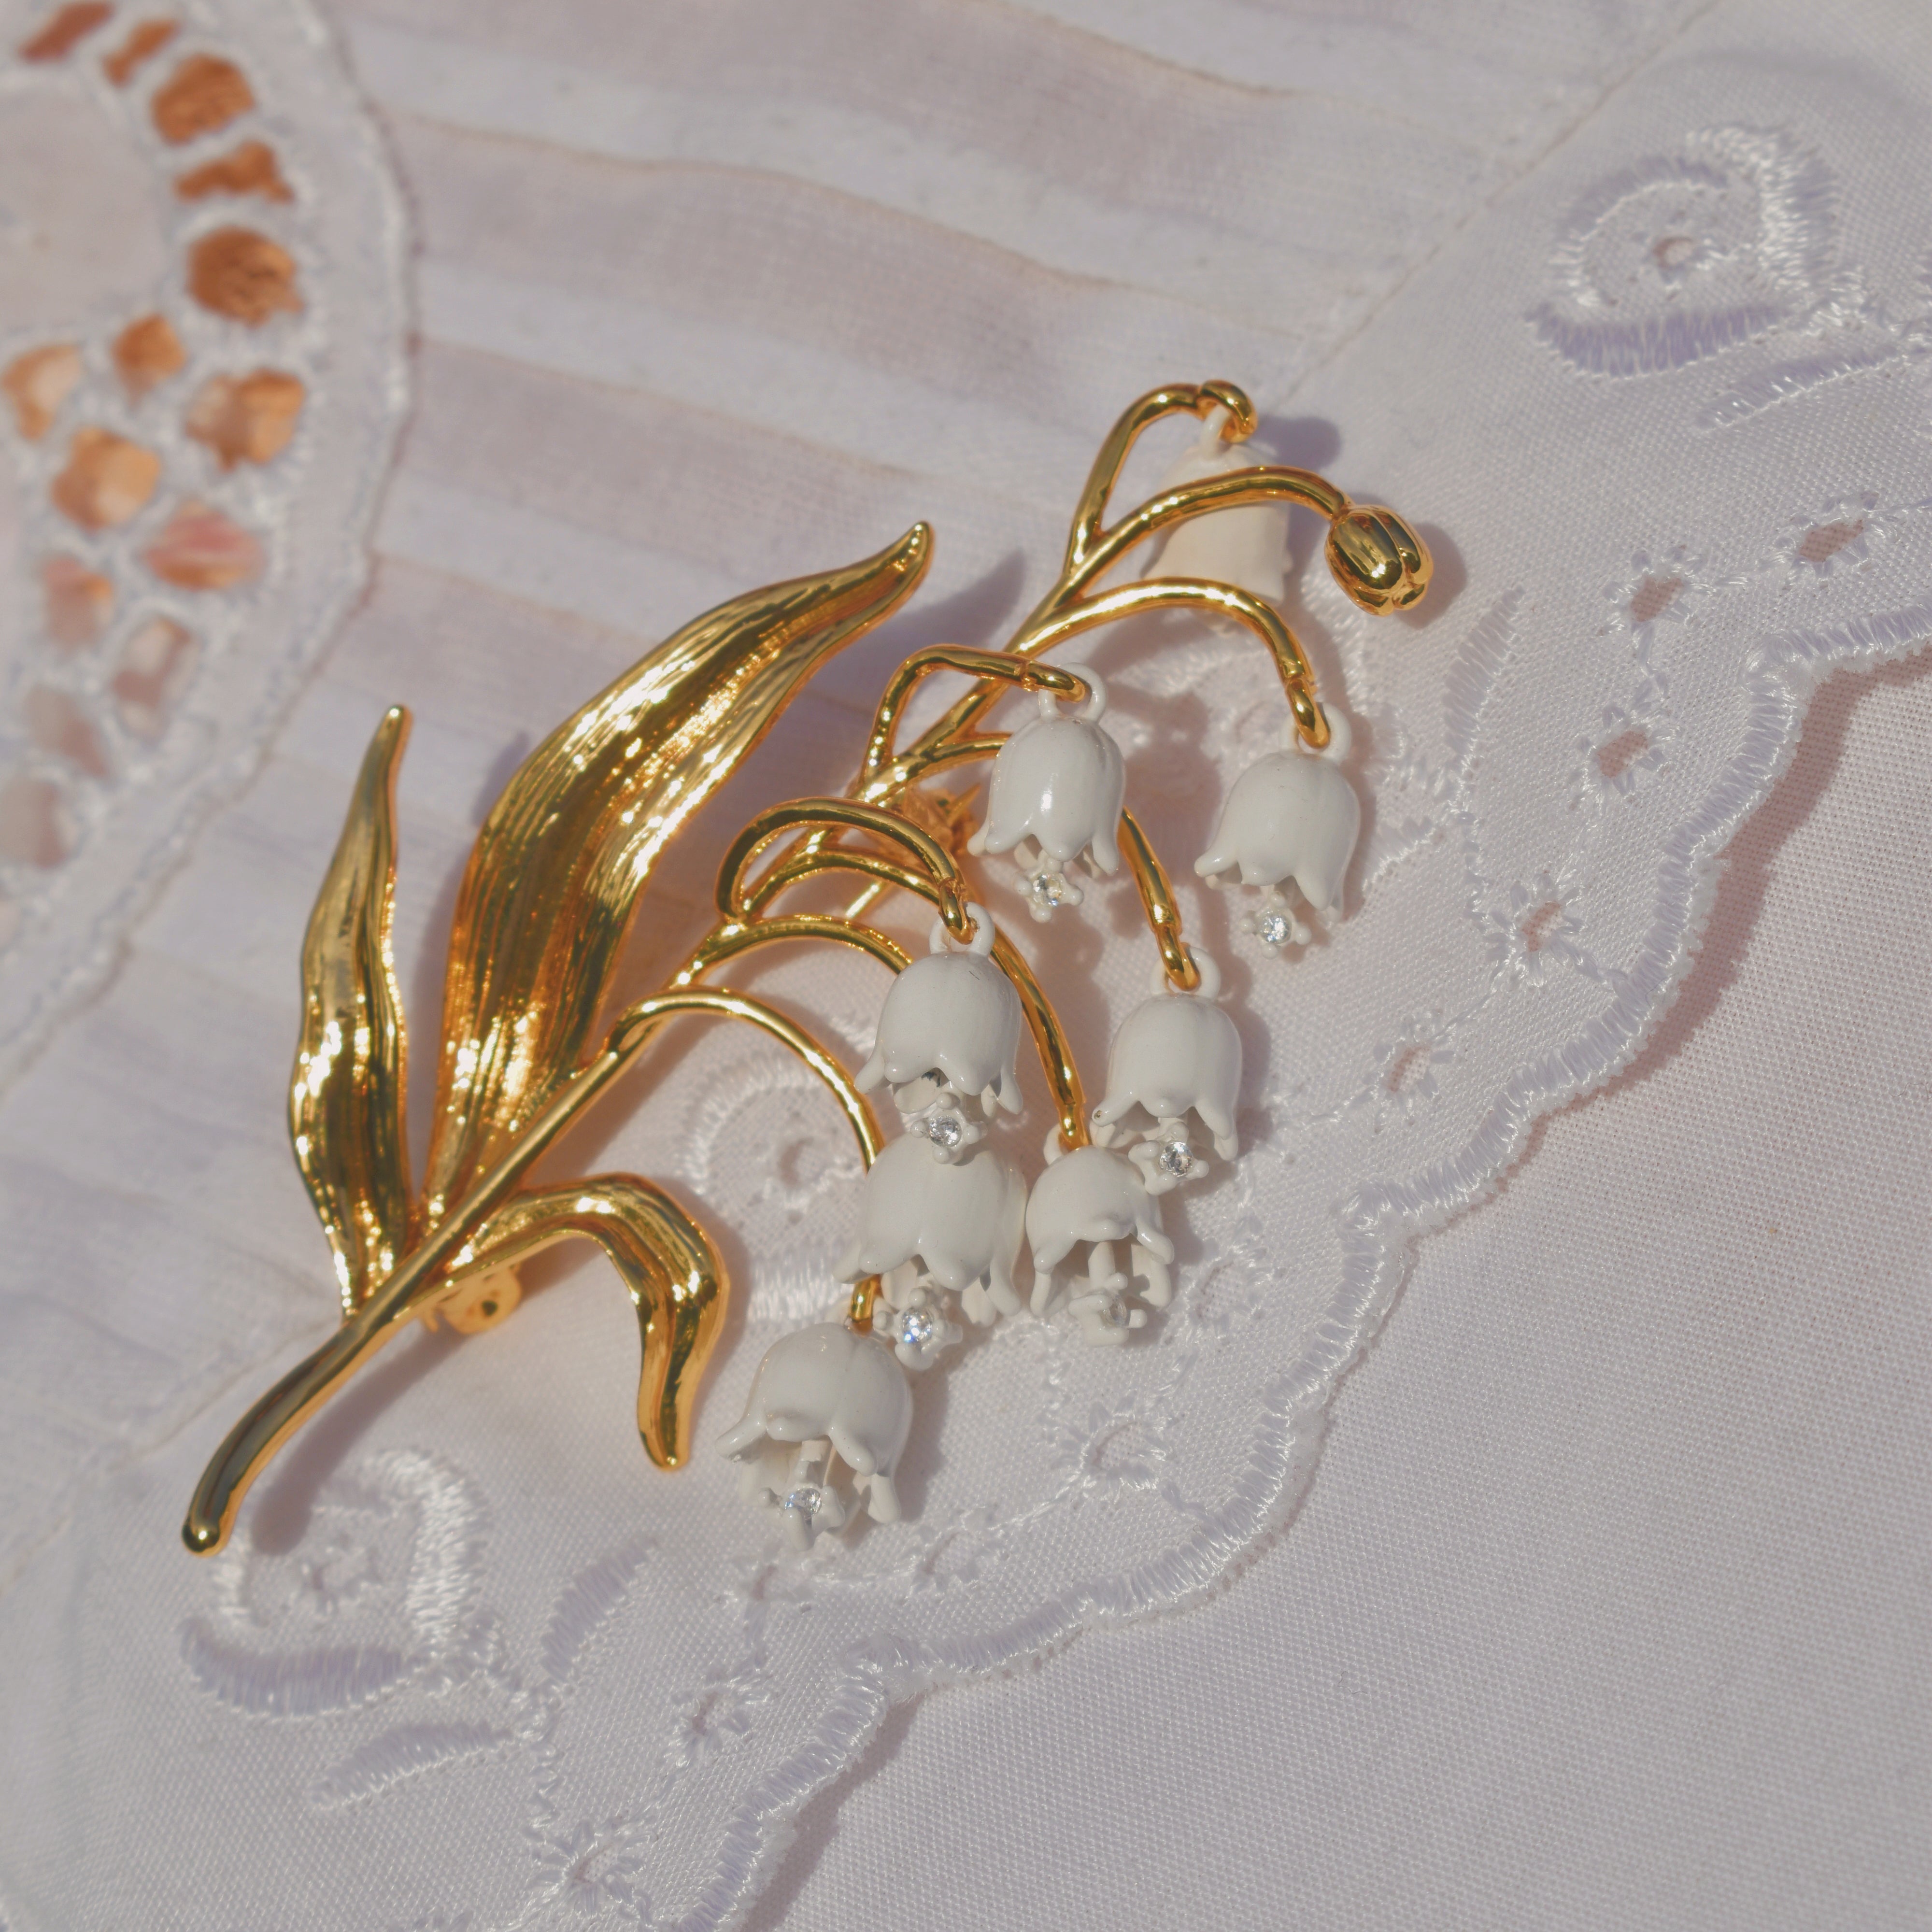 Vintage Golden Lily Of The Valley Brooch